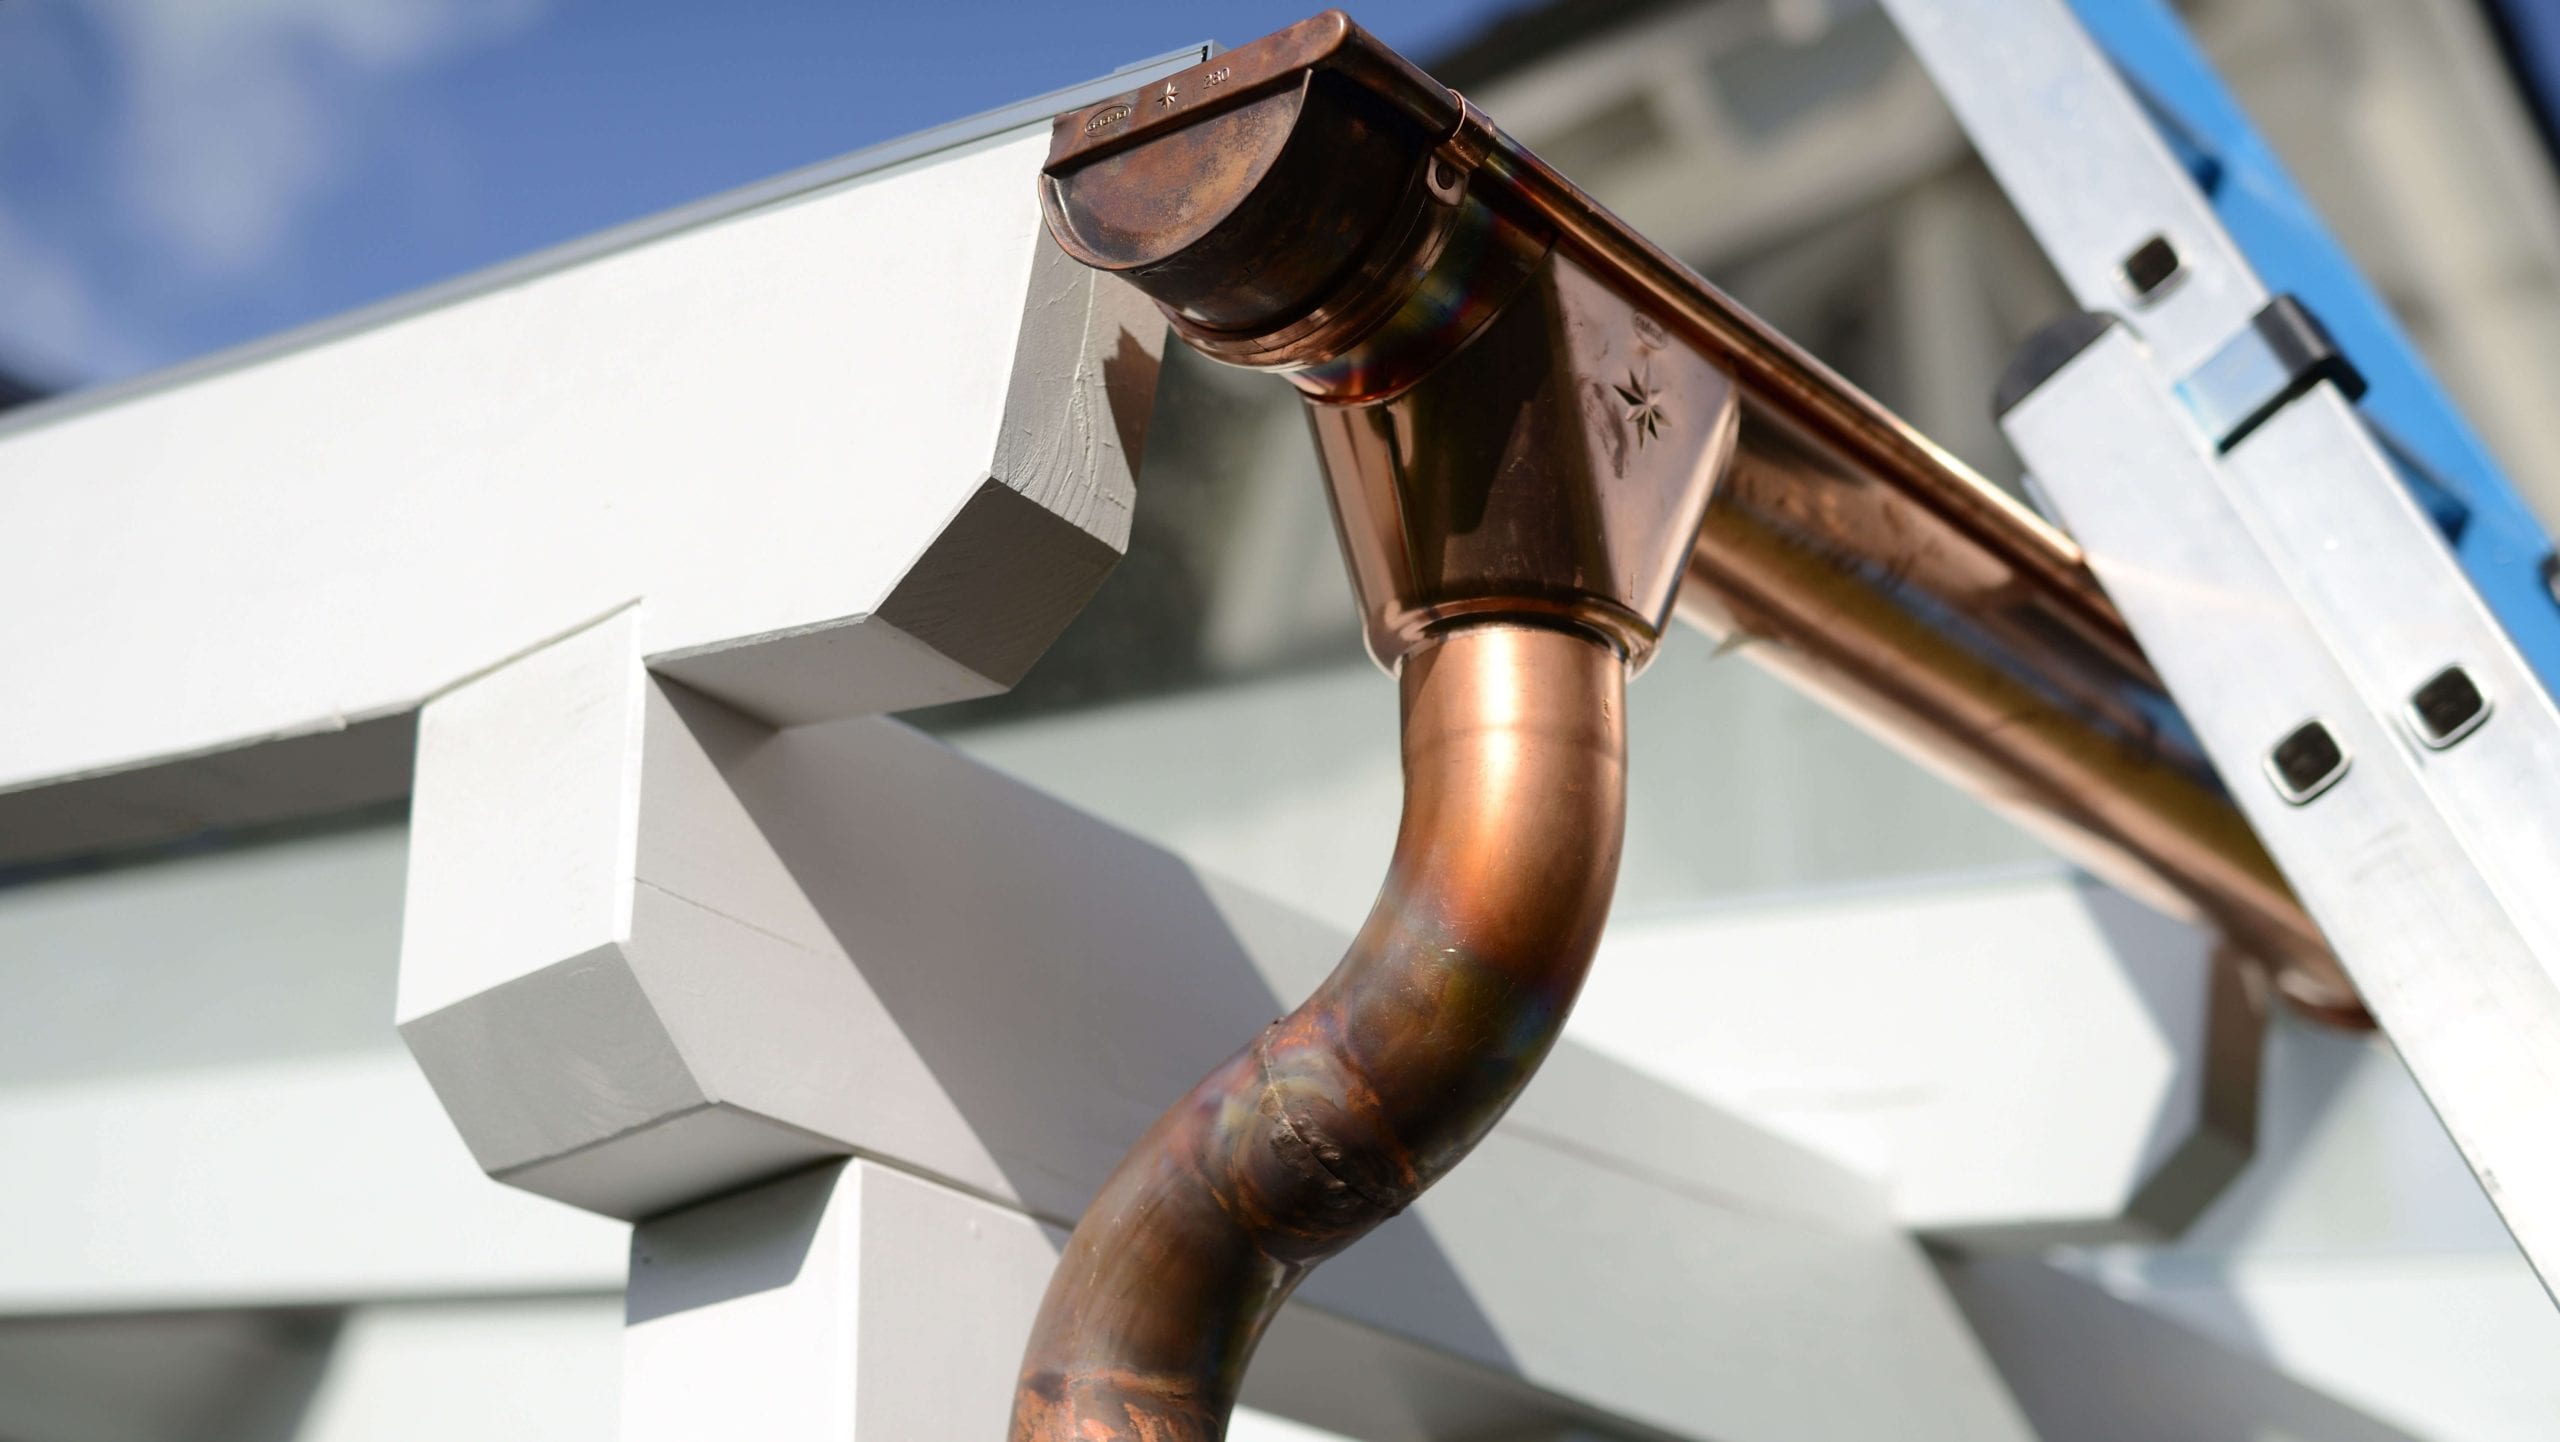 Make your property stand out with copper gutters. Contact for gutter installation in Portland